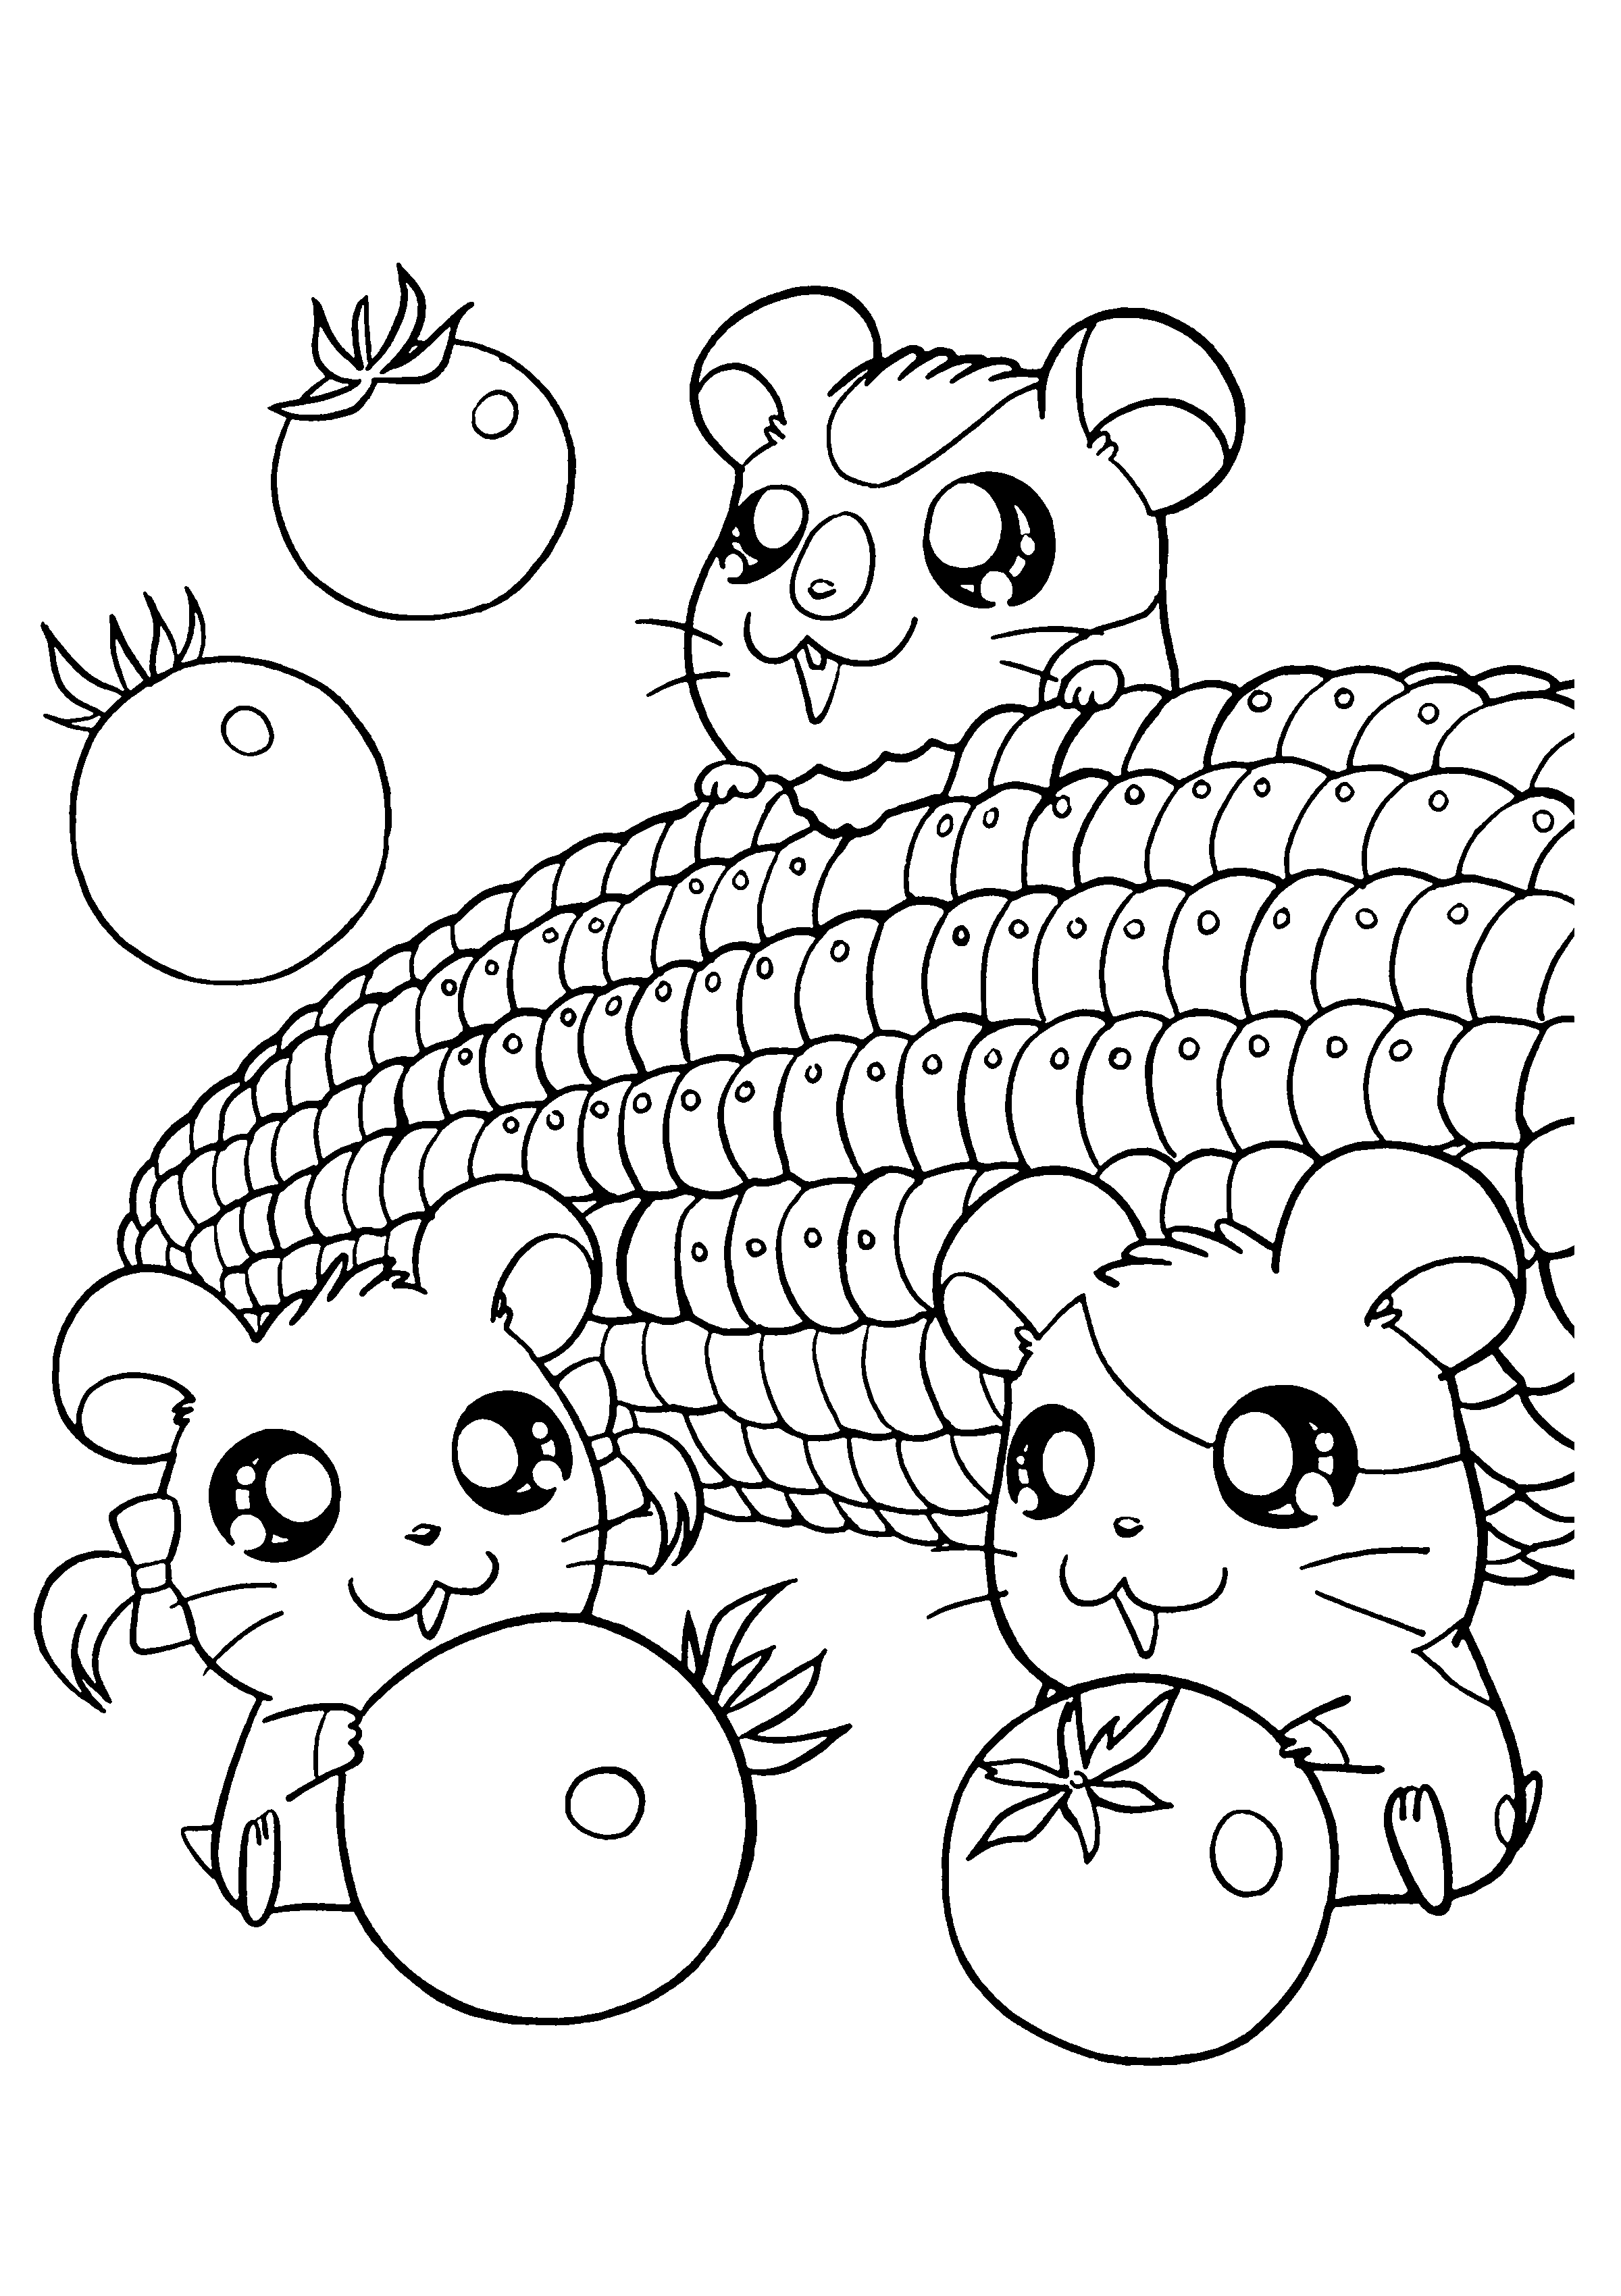 Kawaii Cute Fruits Coloring Pages Coloring Pages